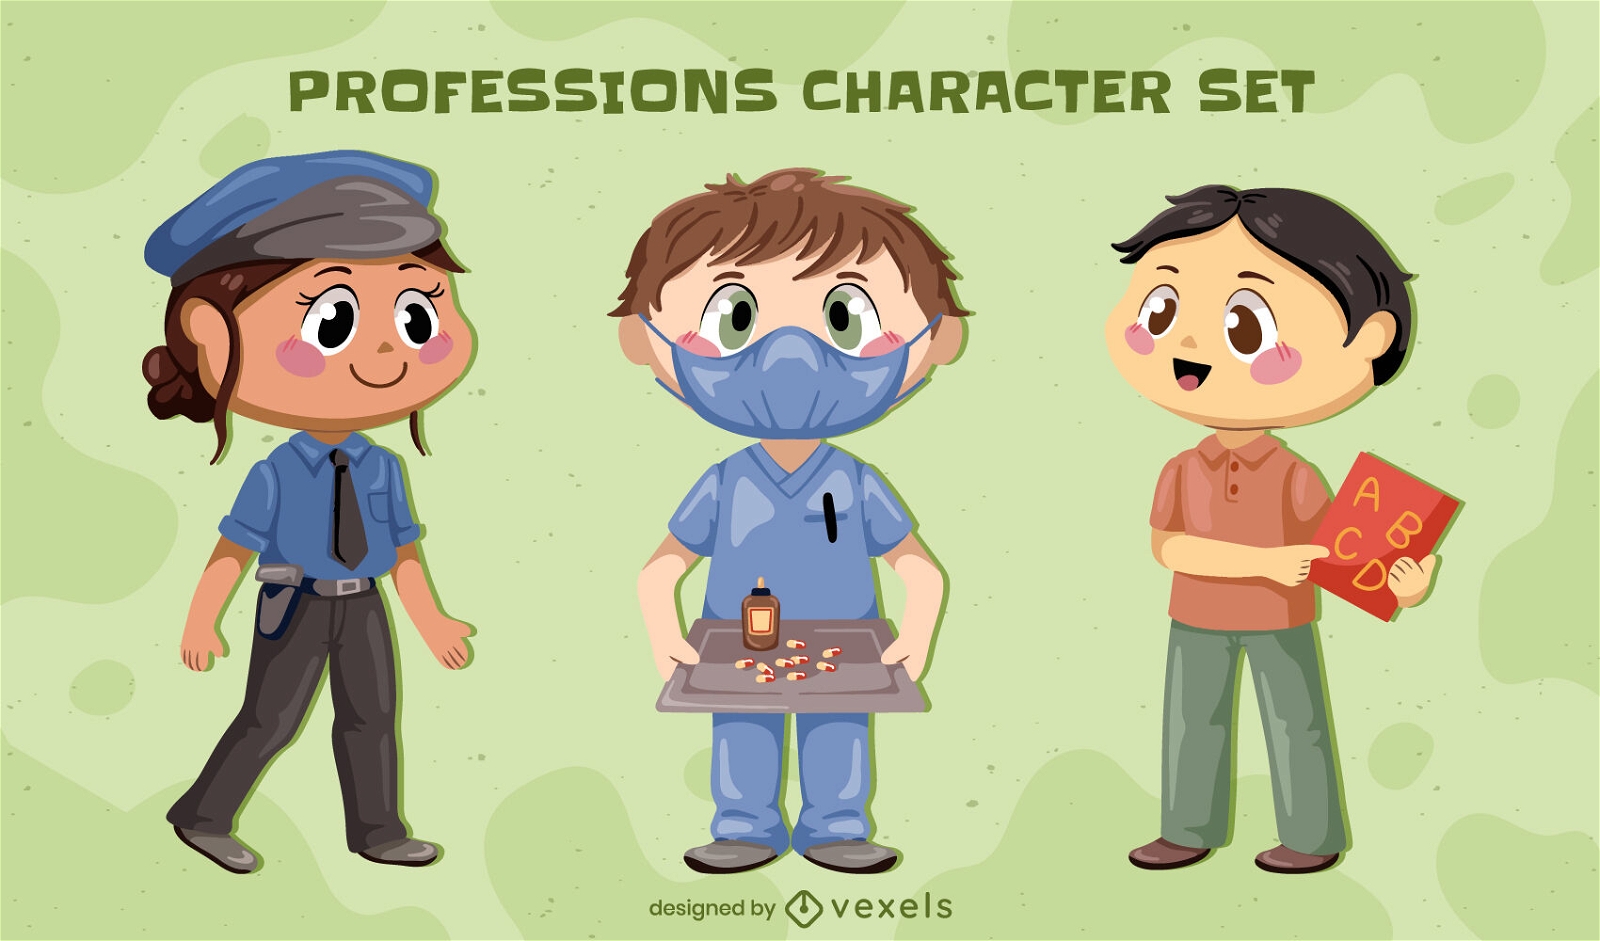 Chibi characters with professional jobs set